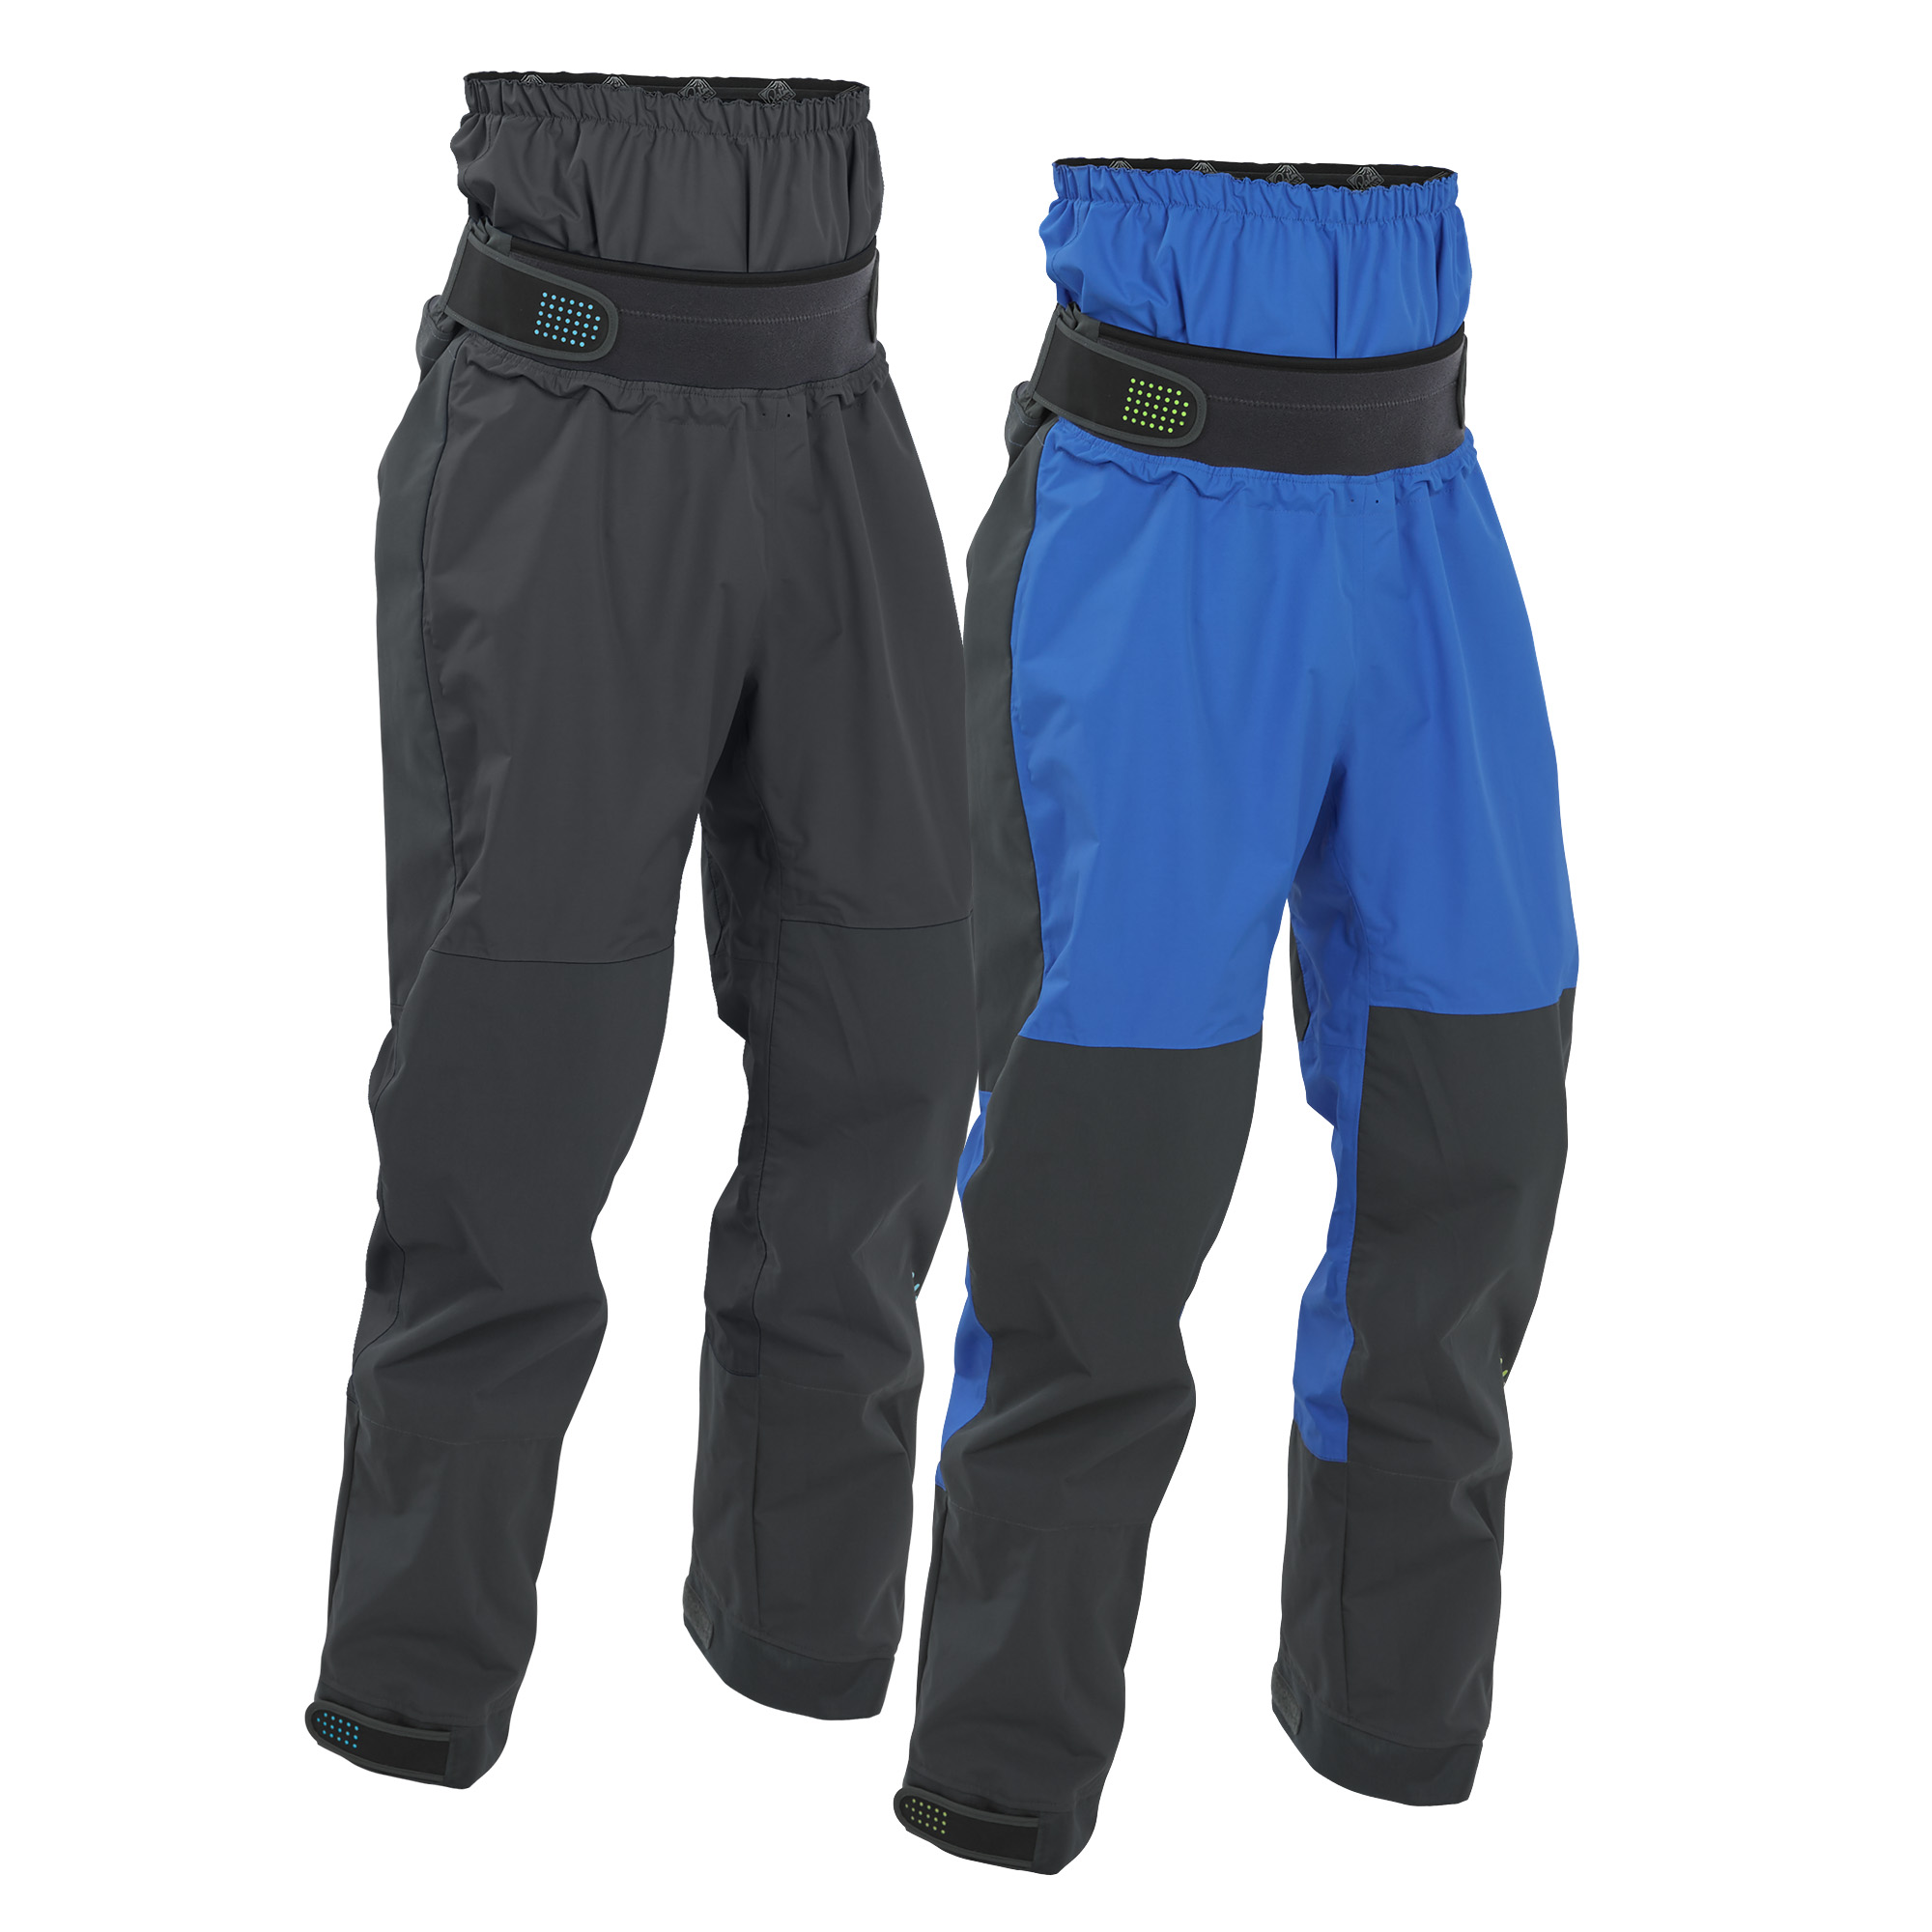 https://www.escape-watersports.co.uk/images/stories/virtuemart/product/palm_zenith_pants_mix.jpg